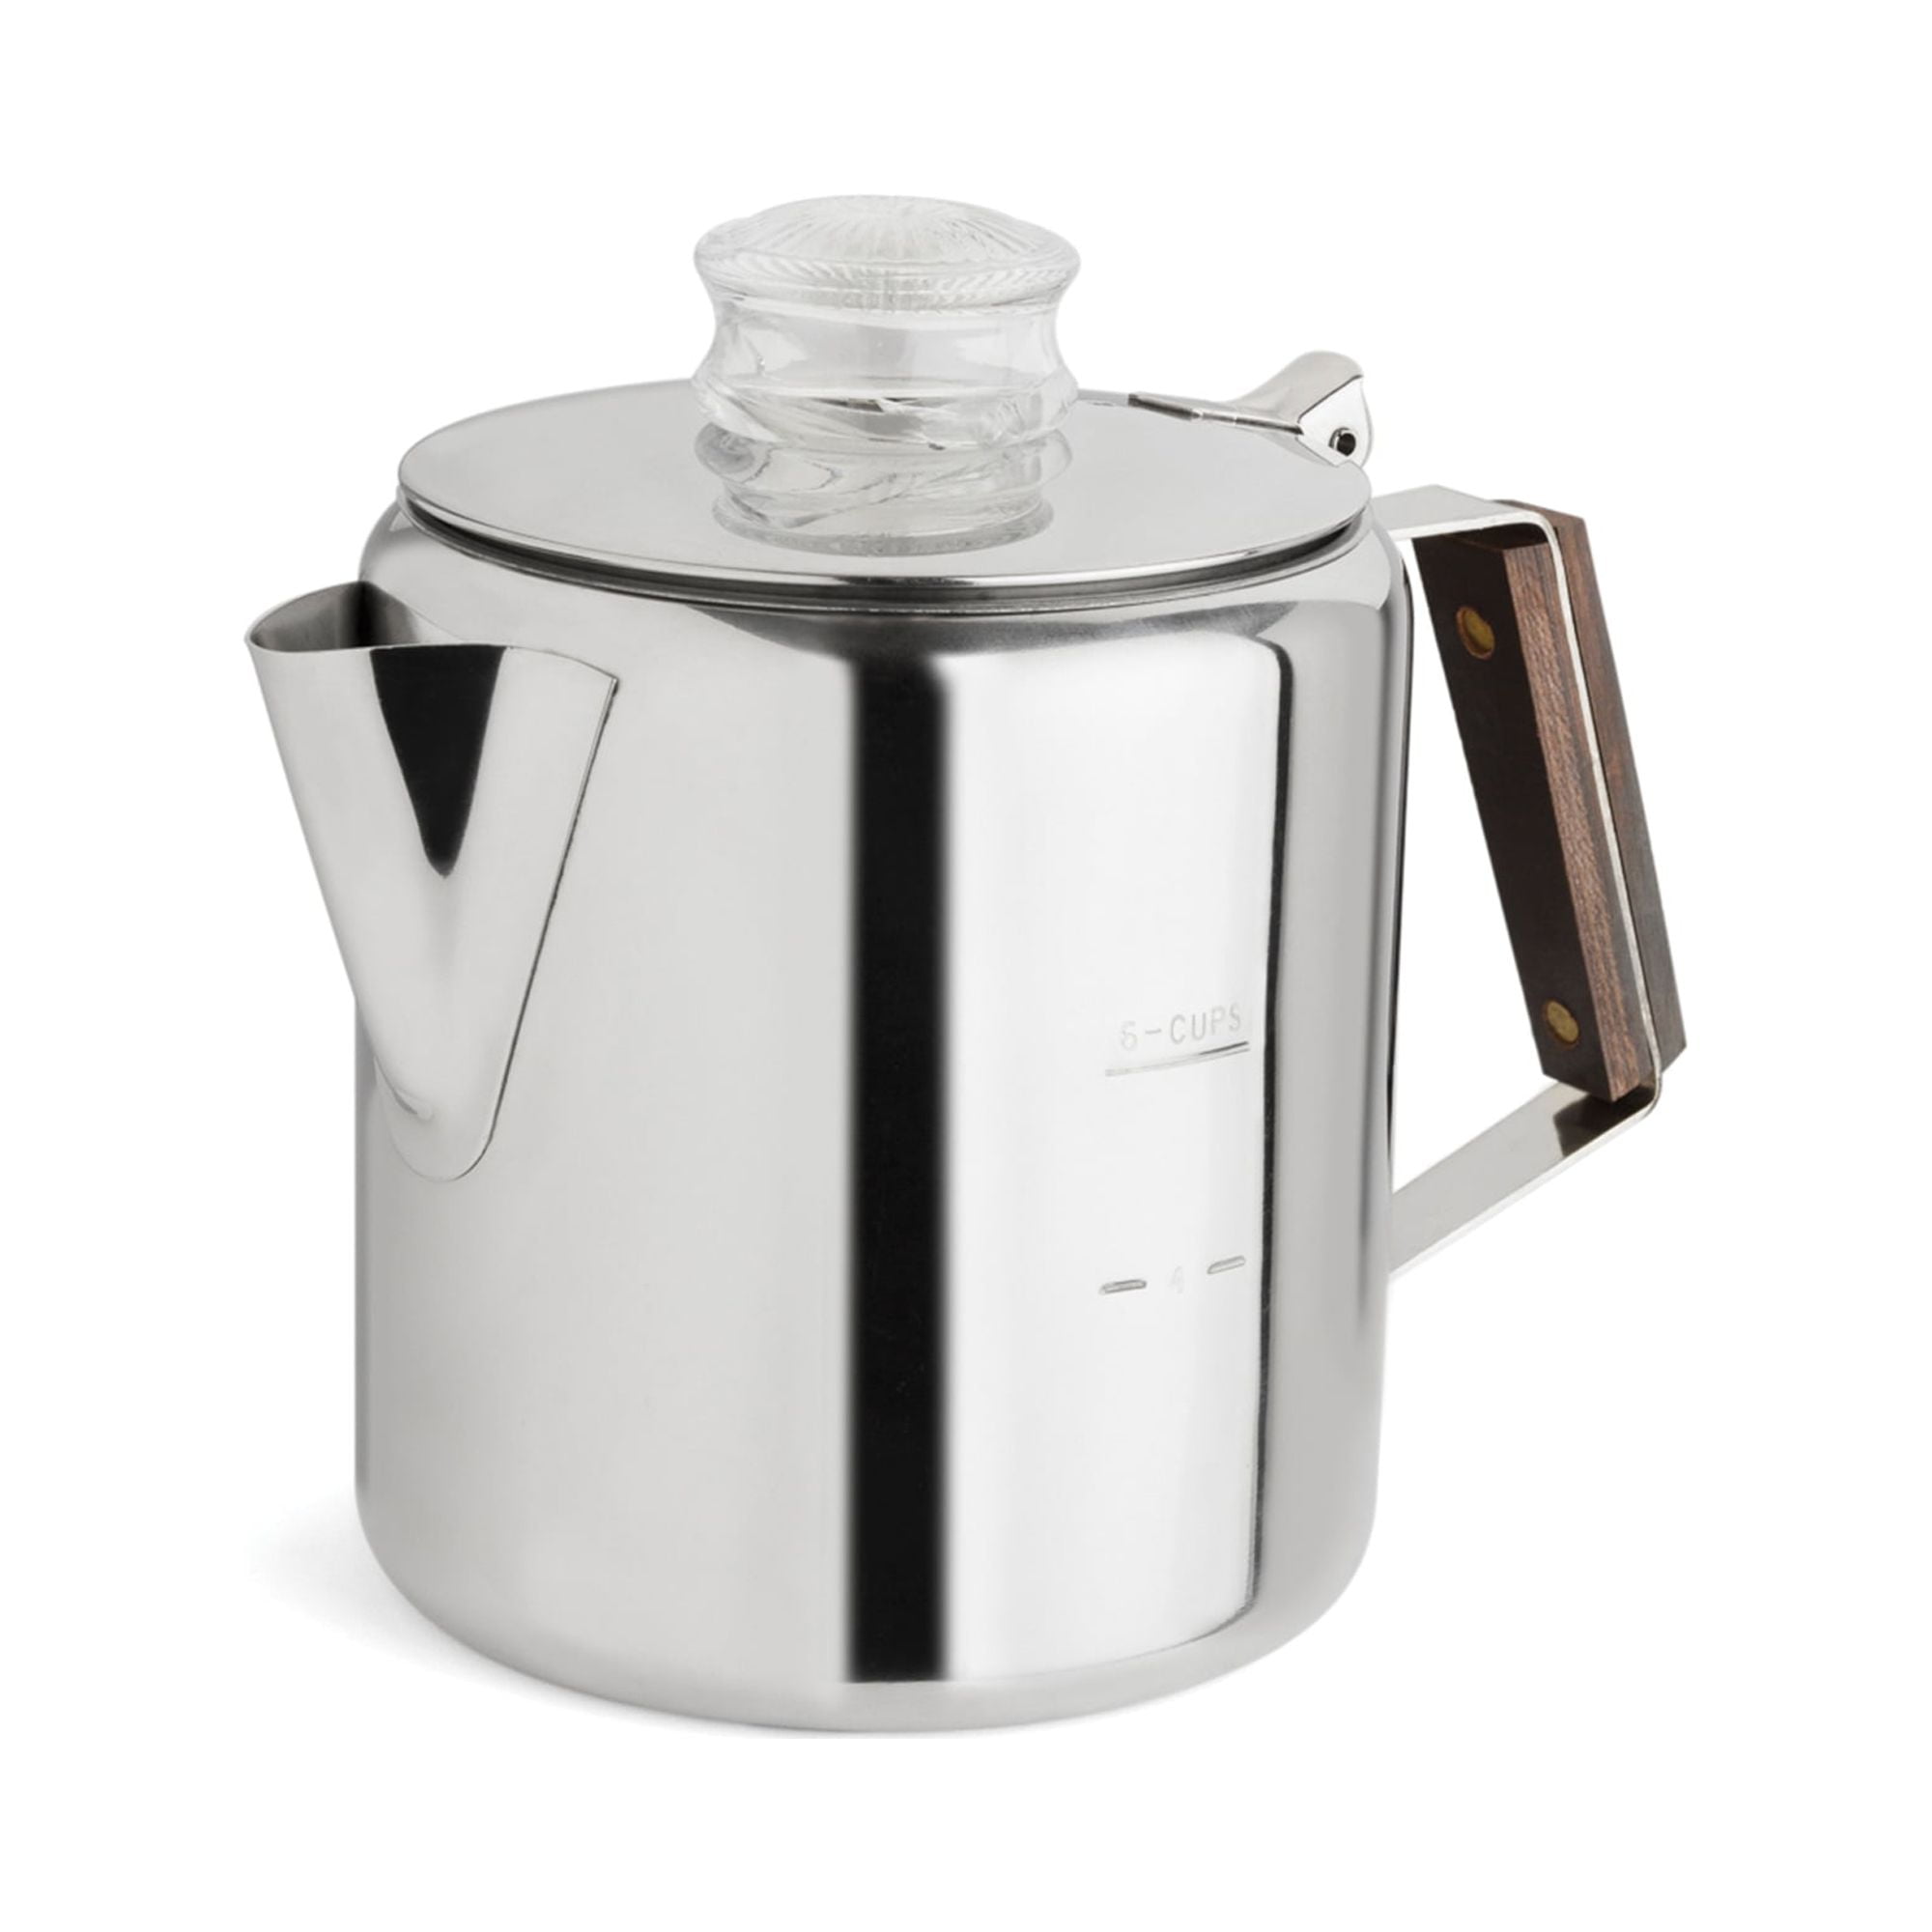 STANLEY Stainless Steel 6 Cup Coffee Percolator 